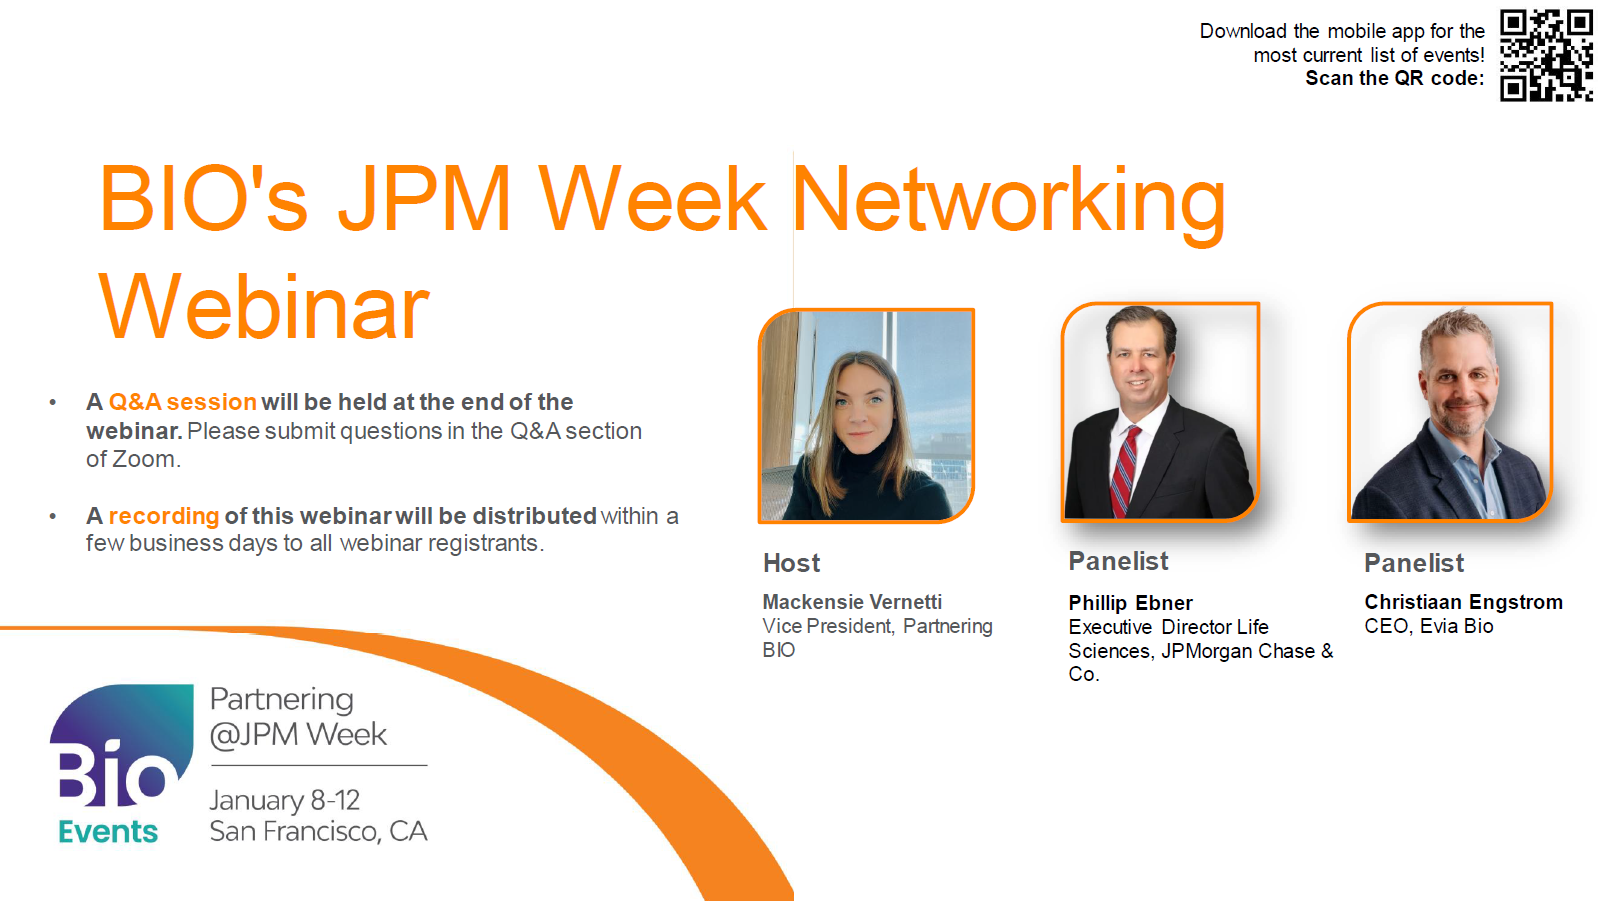 BIO’s JPM Week Events & Networking Preview